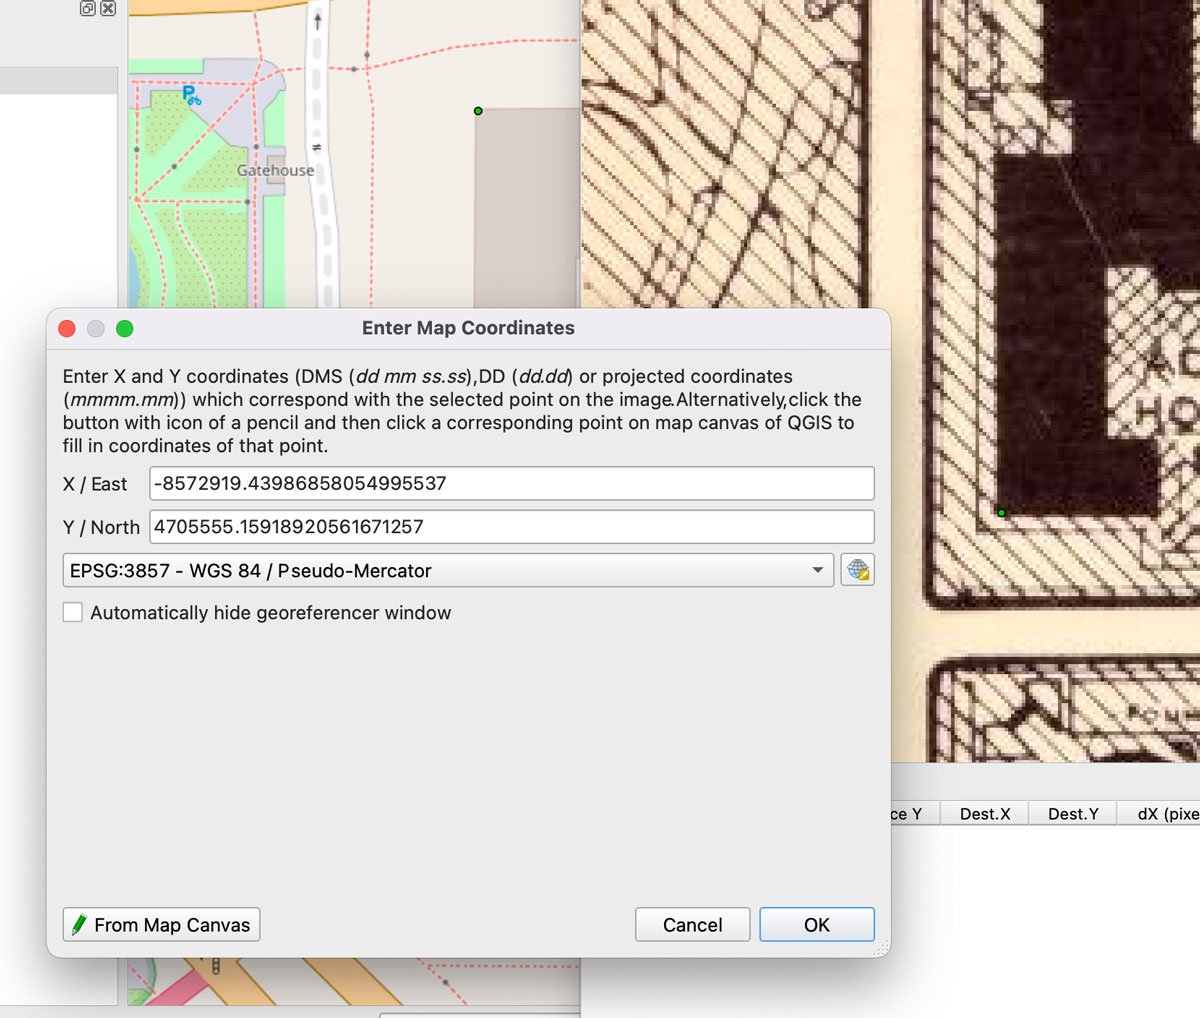 Screenshot showing the "Enter Map Coordinates" interface with corresponding green dots on the scanned map and the OpenStreetMap layer.